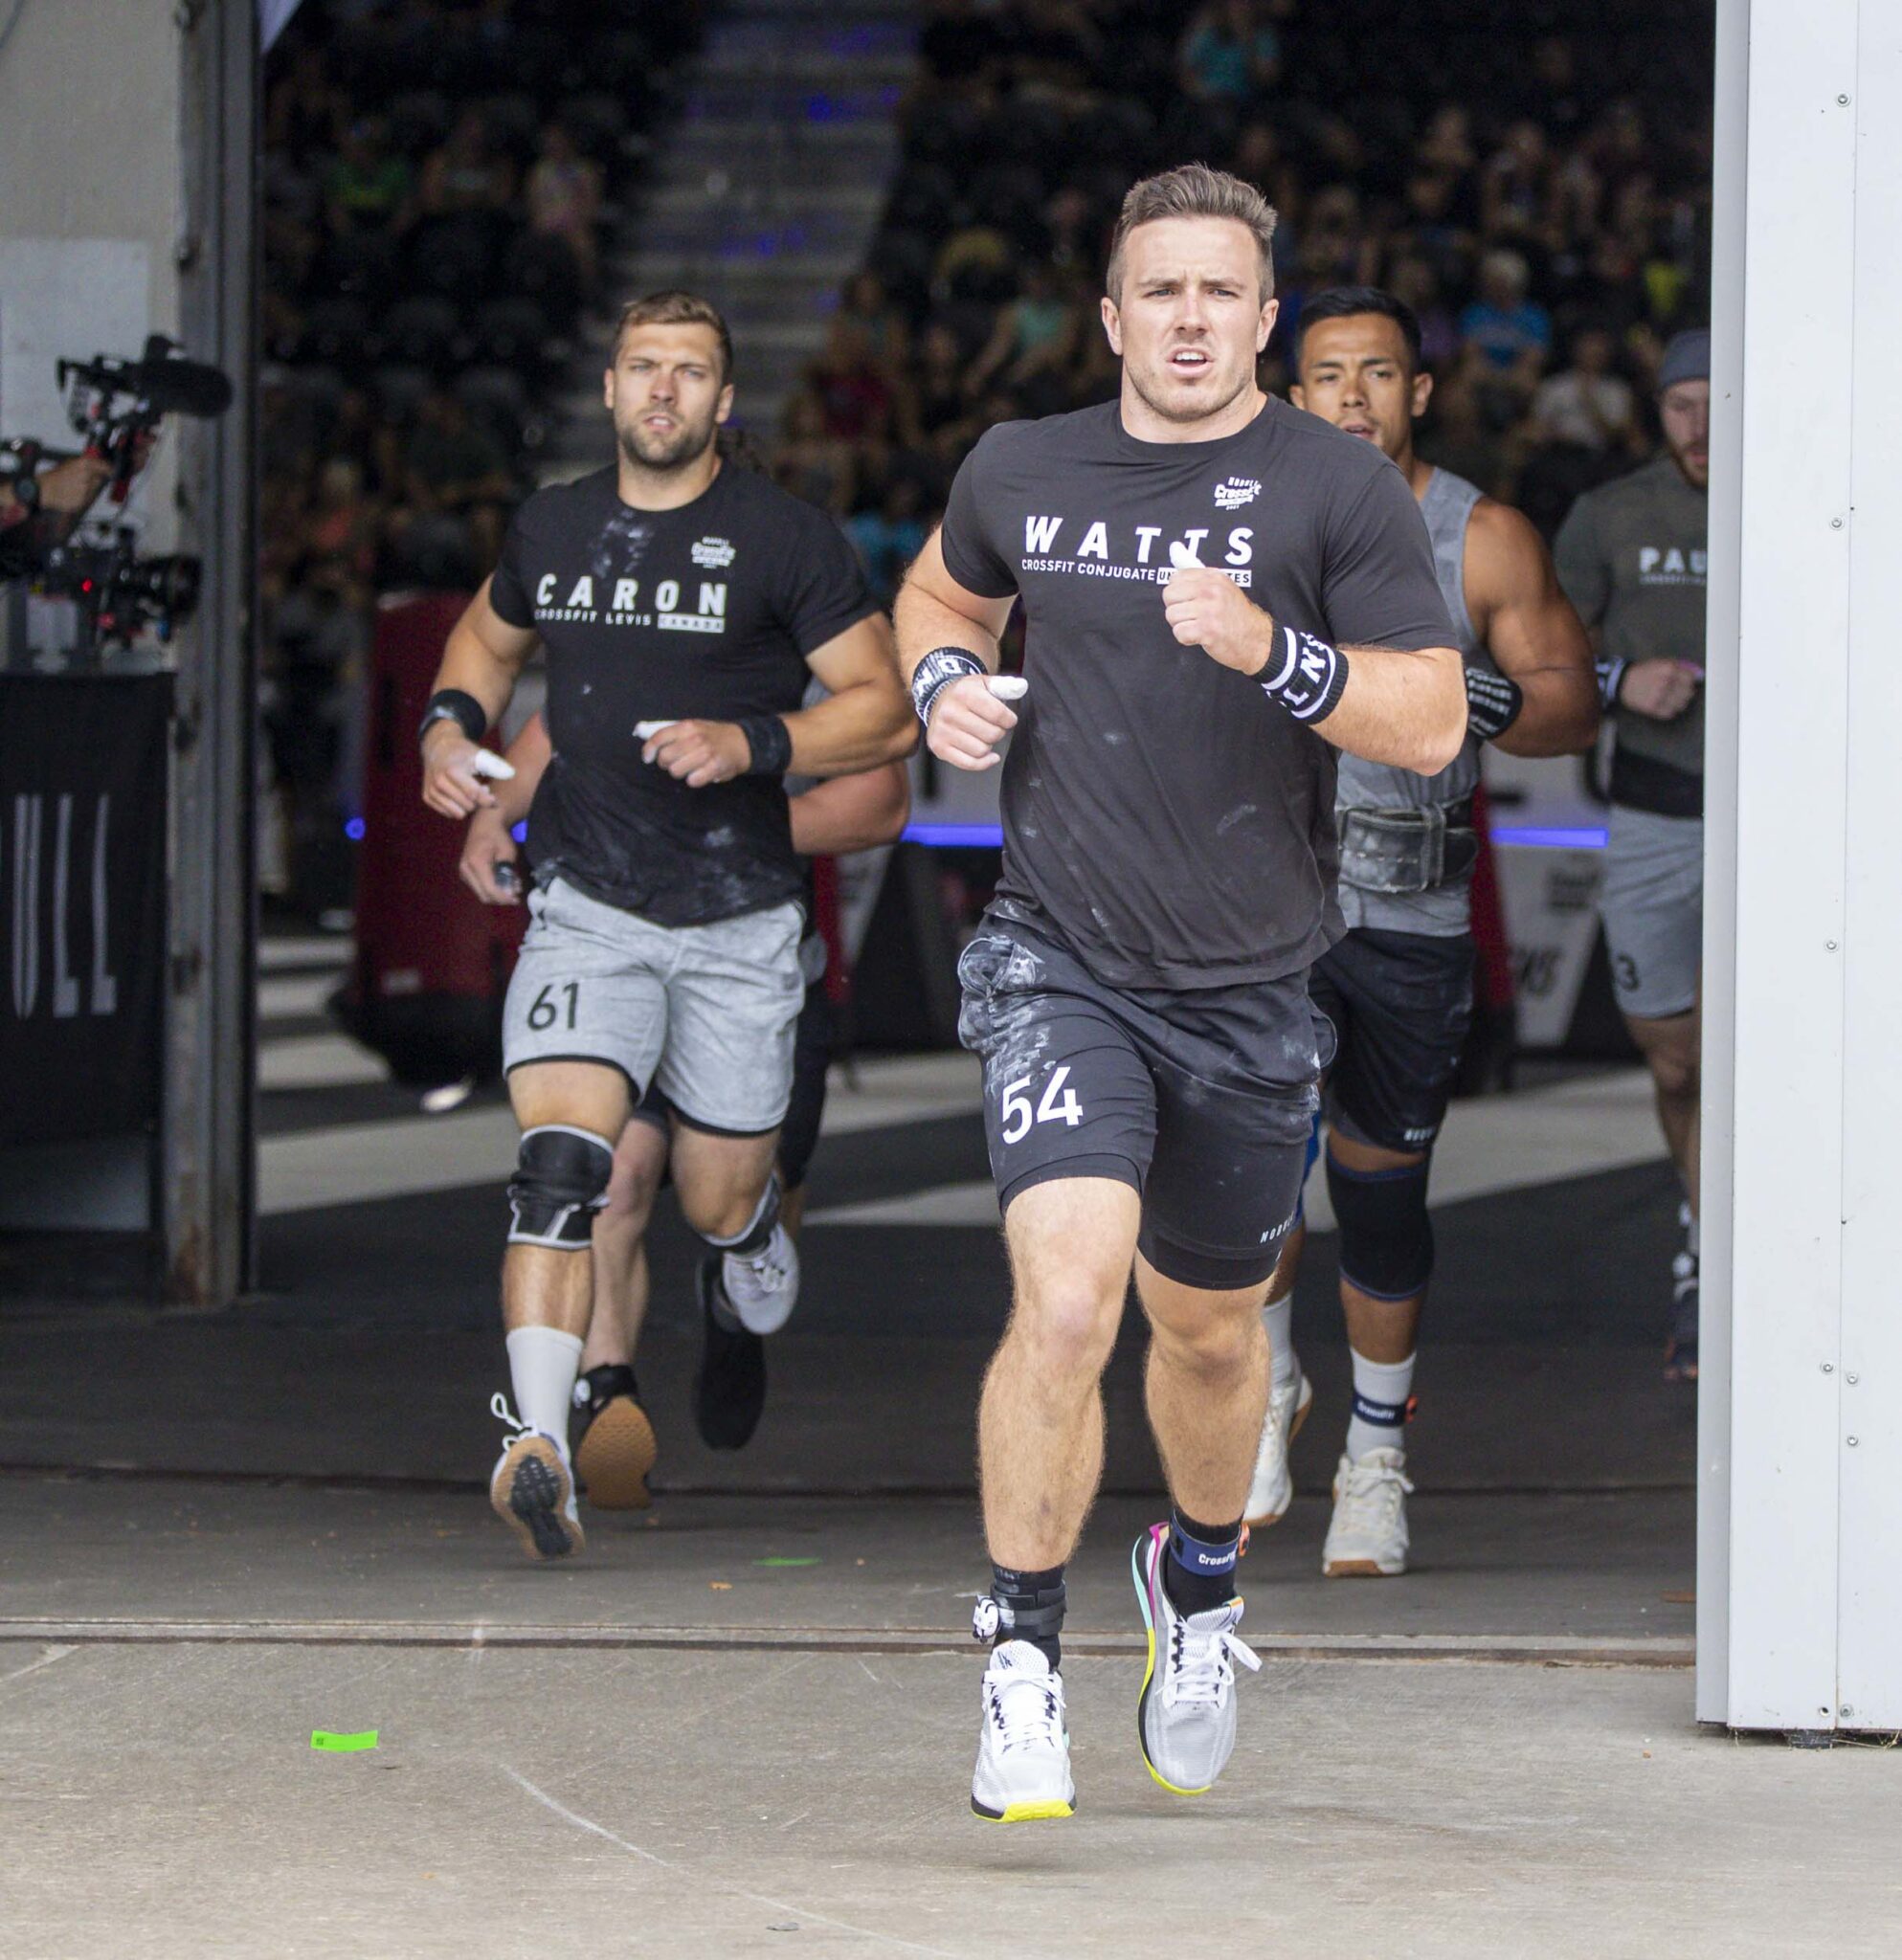 Final CrossFit Games Cuts Find Out Which Male Athletes Are Out of the